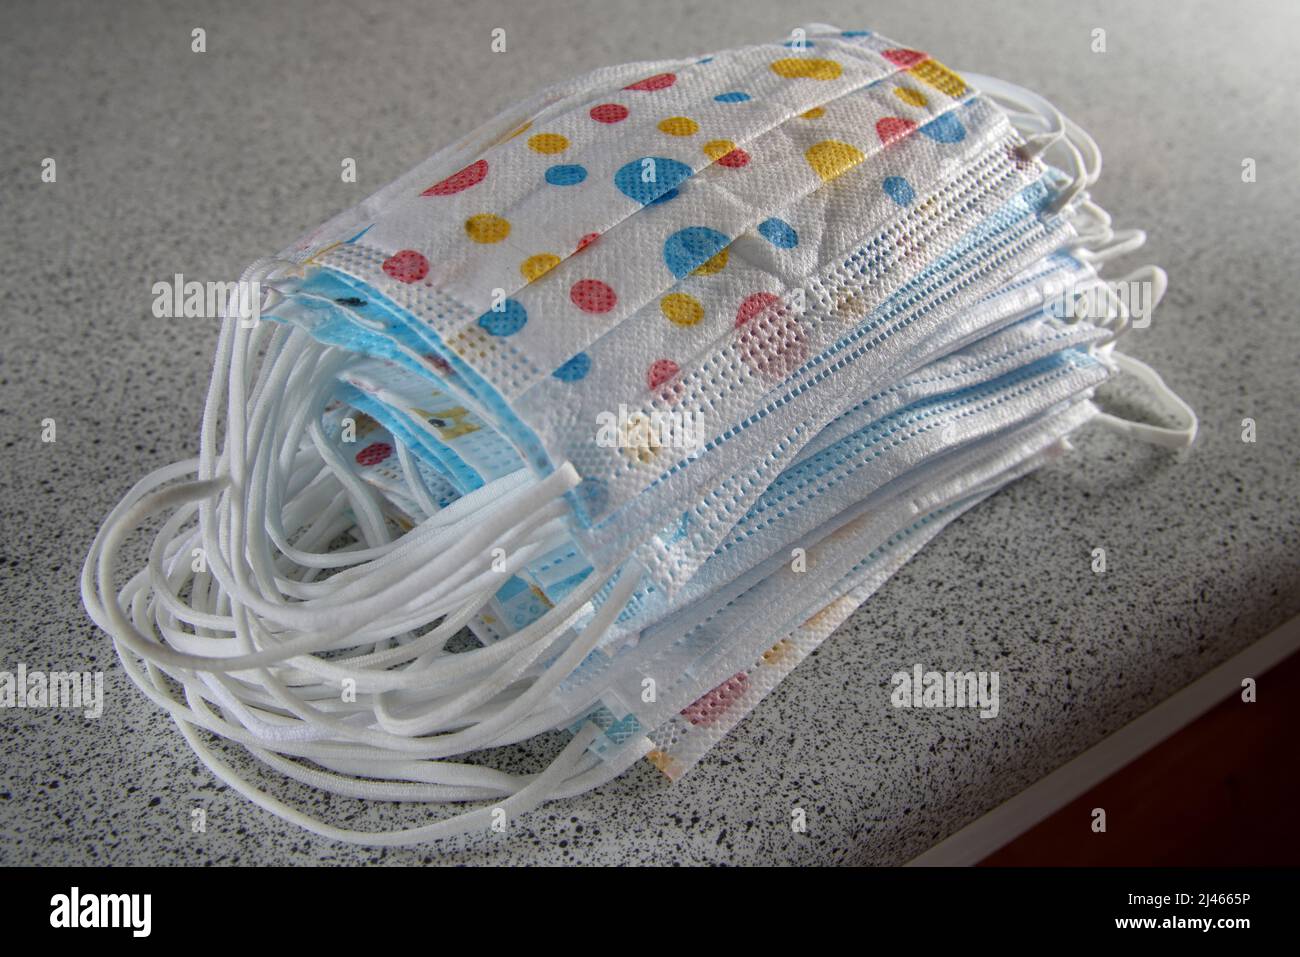 Stack of children's surgical masks. Stock Photo